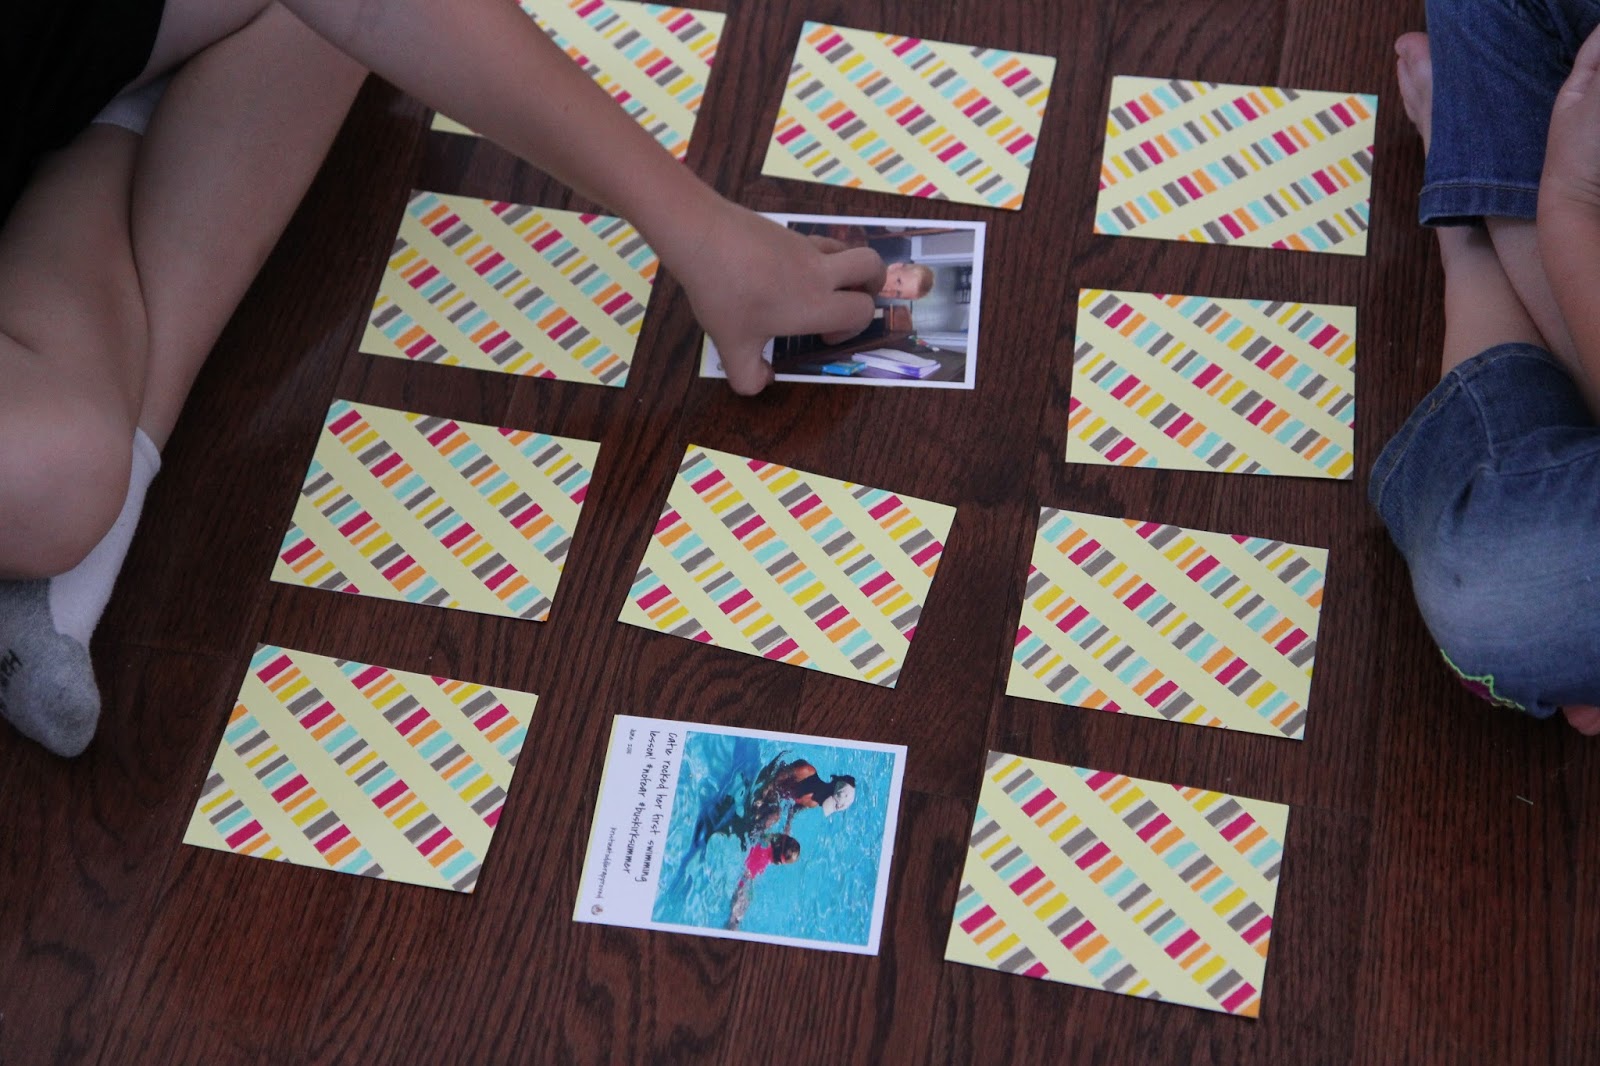 Toddler Approved!: DIY Memory Game for Kids